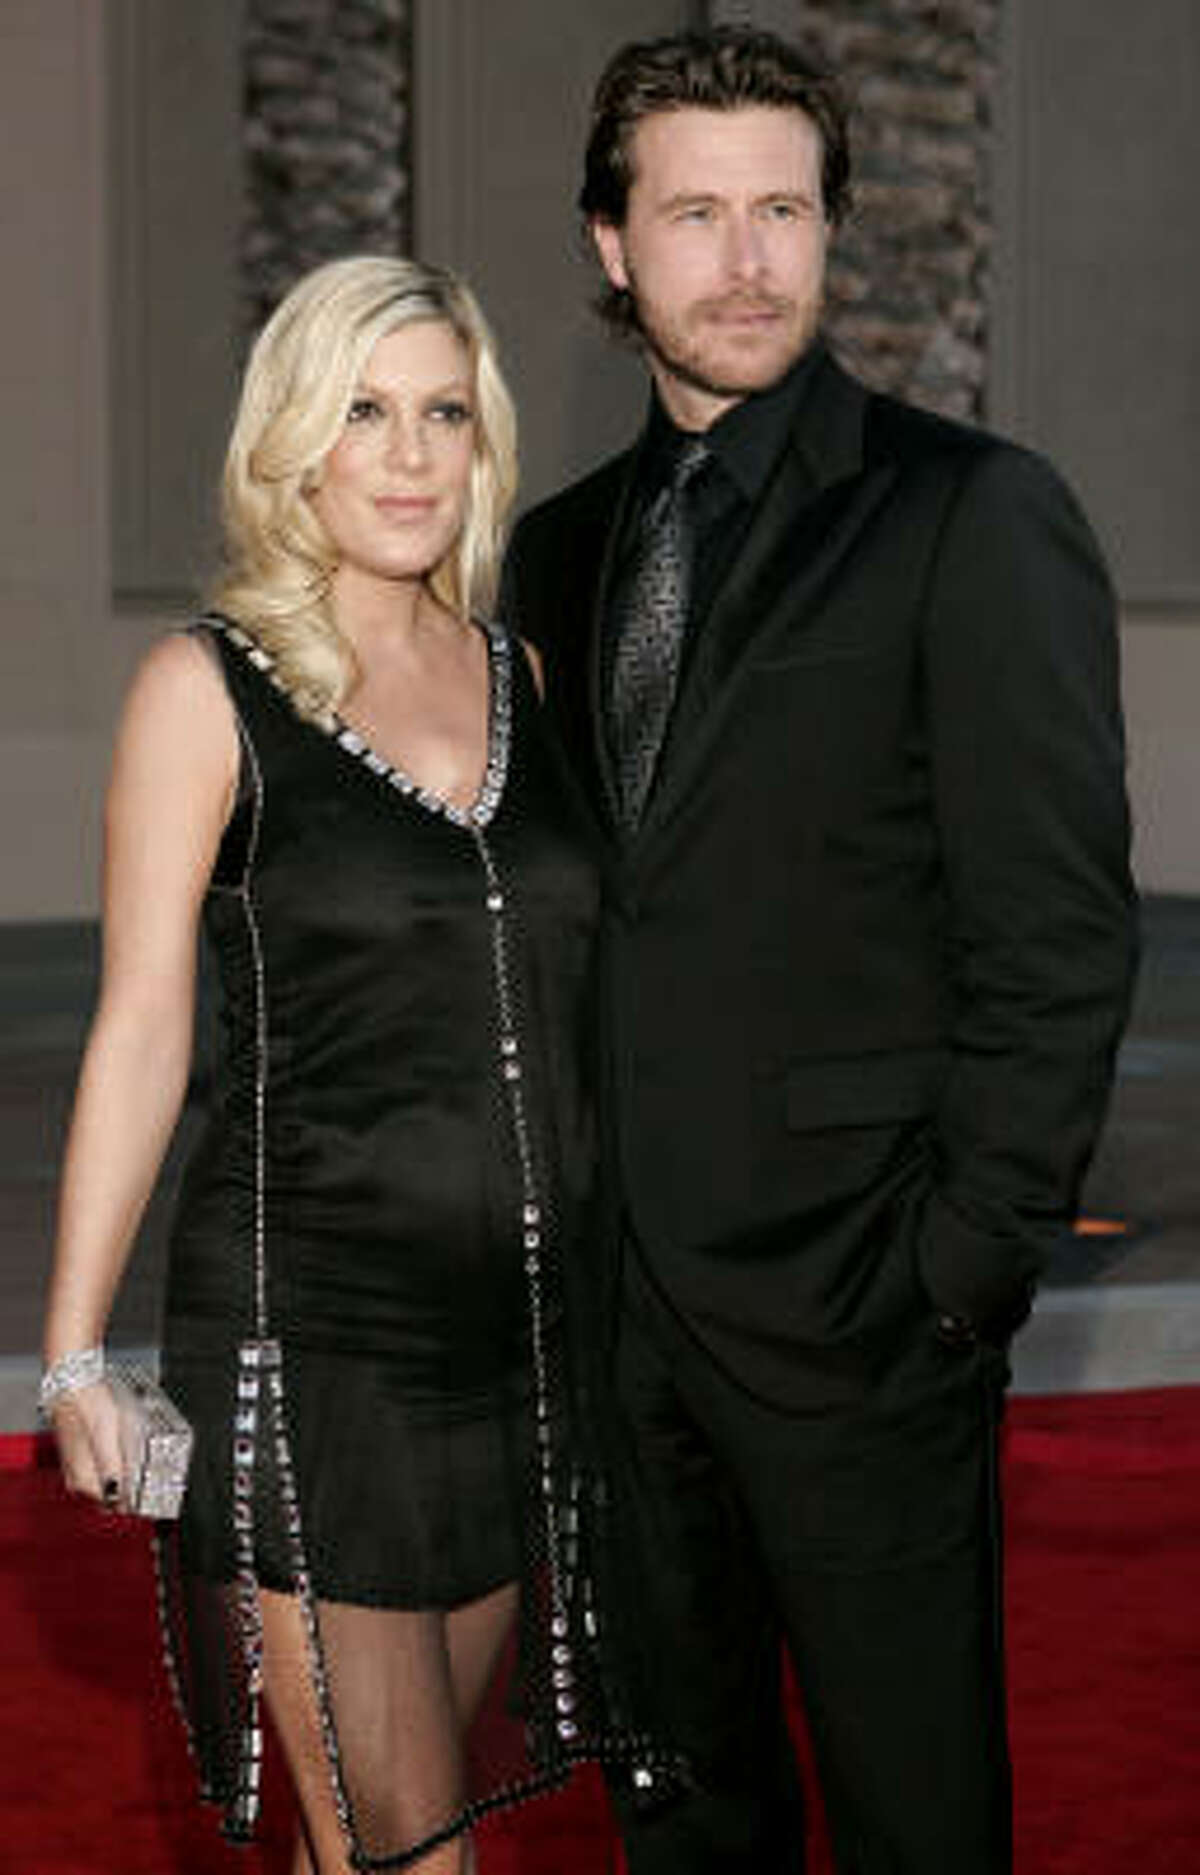 Tori Spelling and husband Dean McDermott arrive for the 2006 American Music Awards, Nov. 21, in Los Angeles.